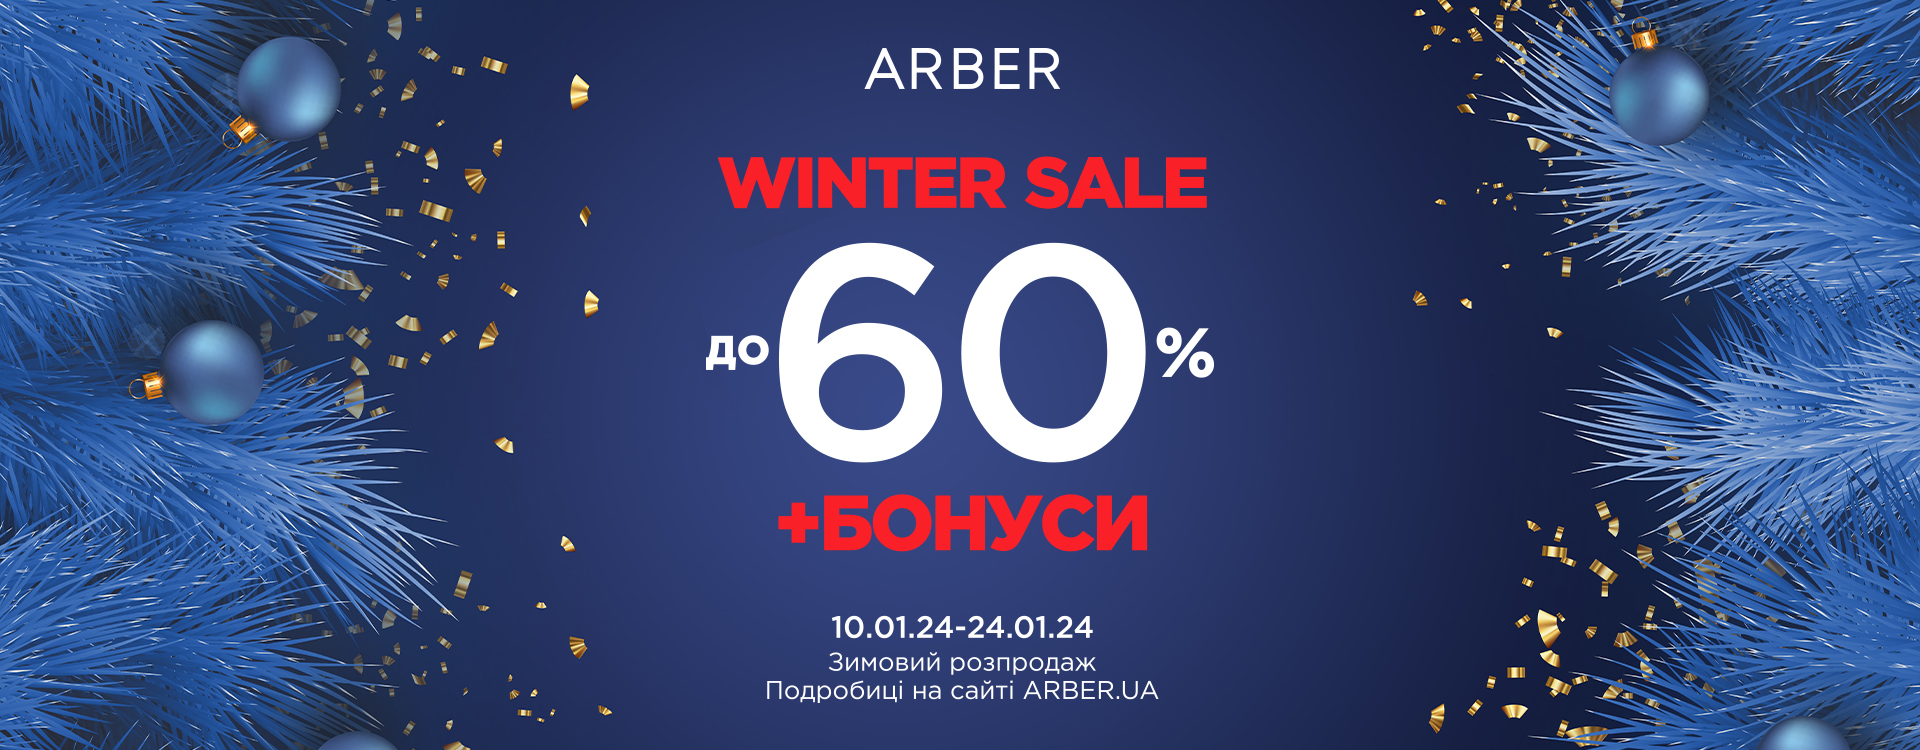 Big winter sale at ARBER with discounts